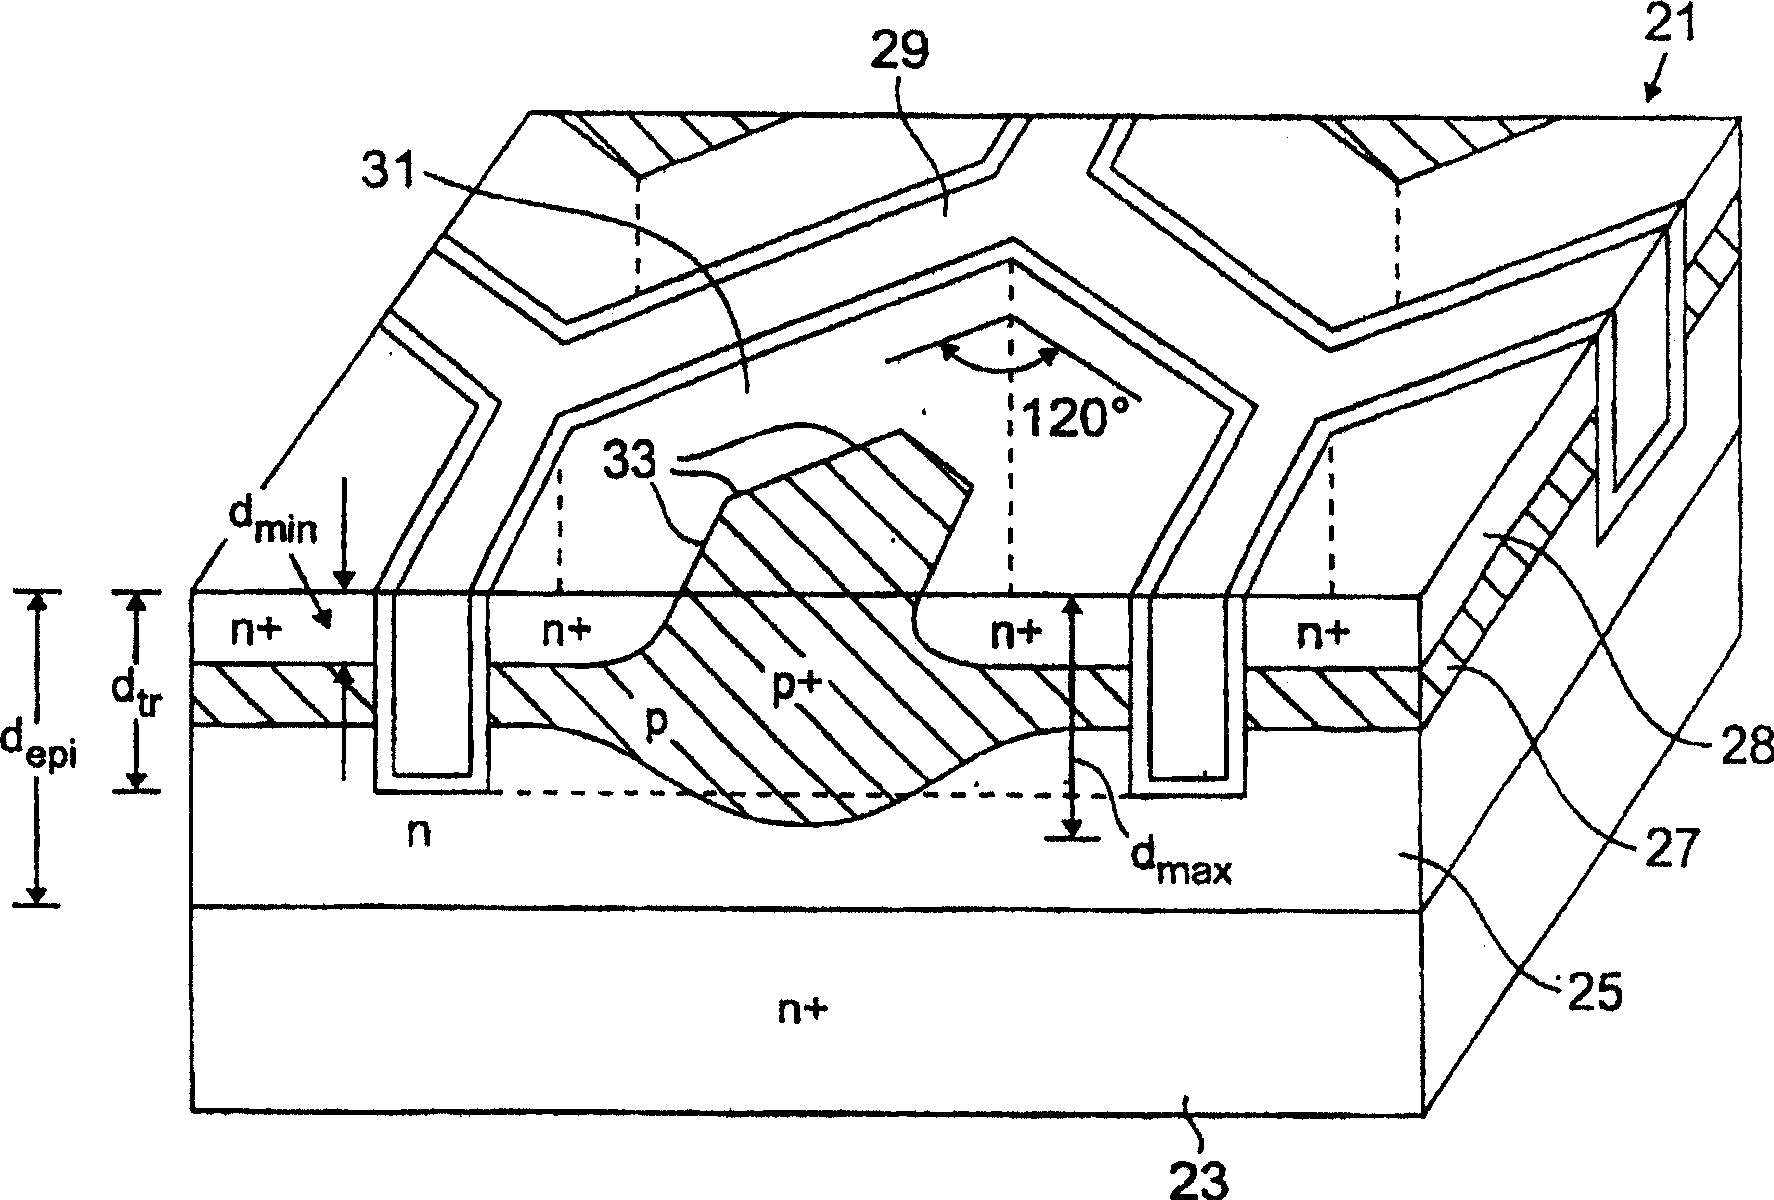 Trench MOSFET device with improved on-resistance